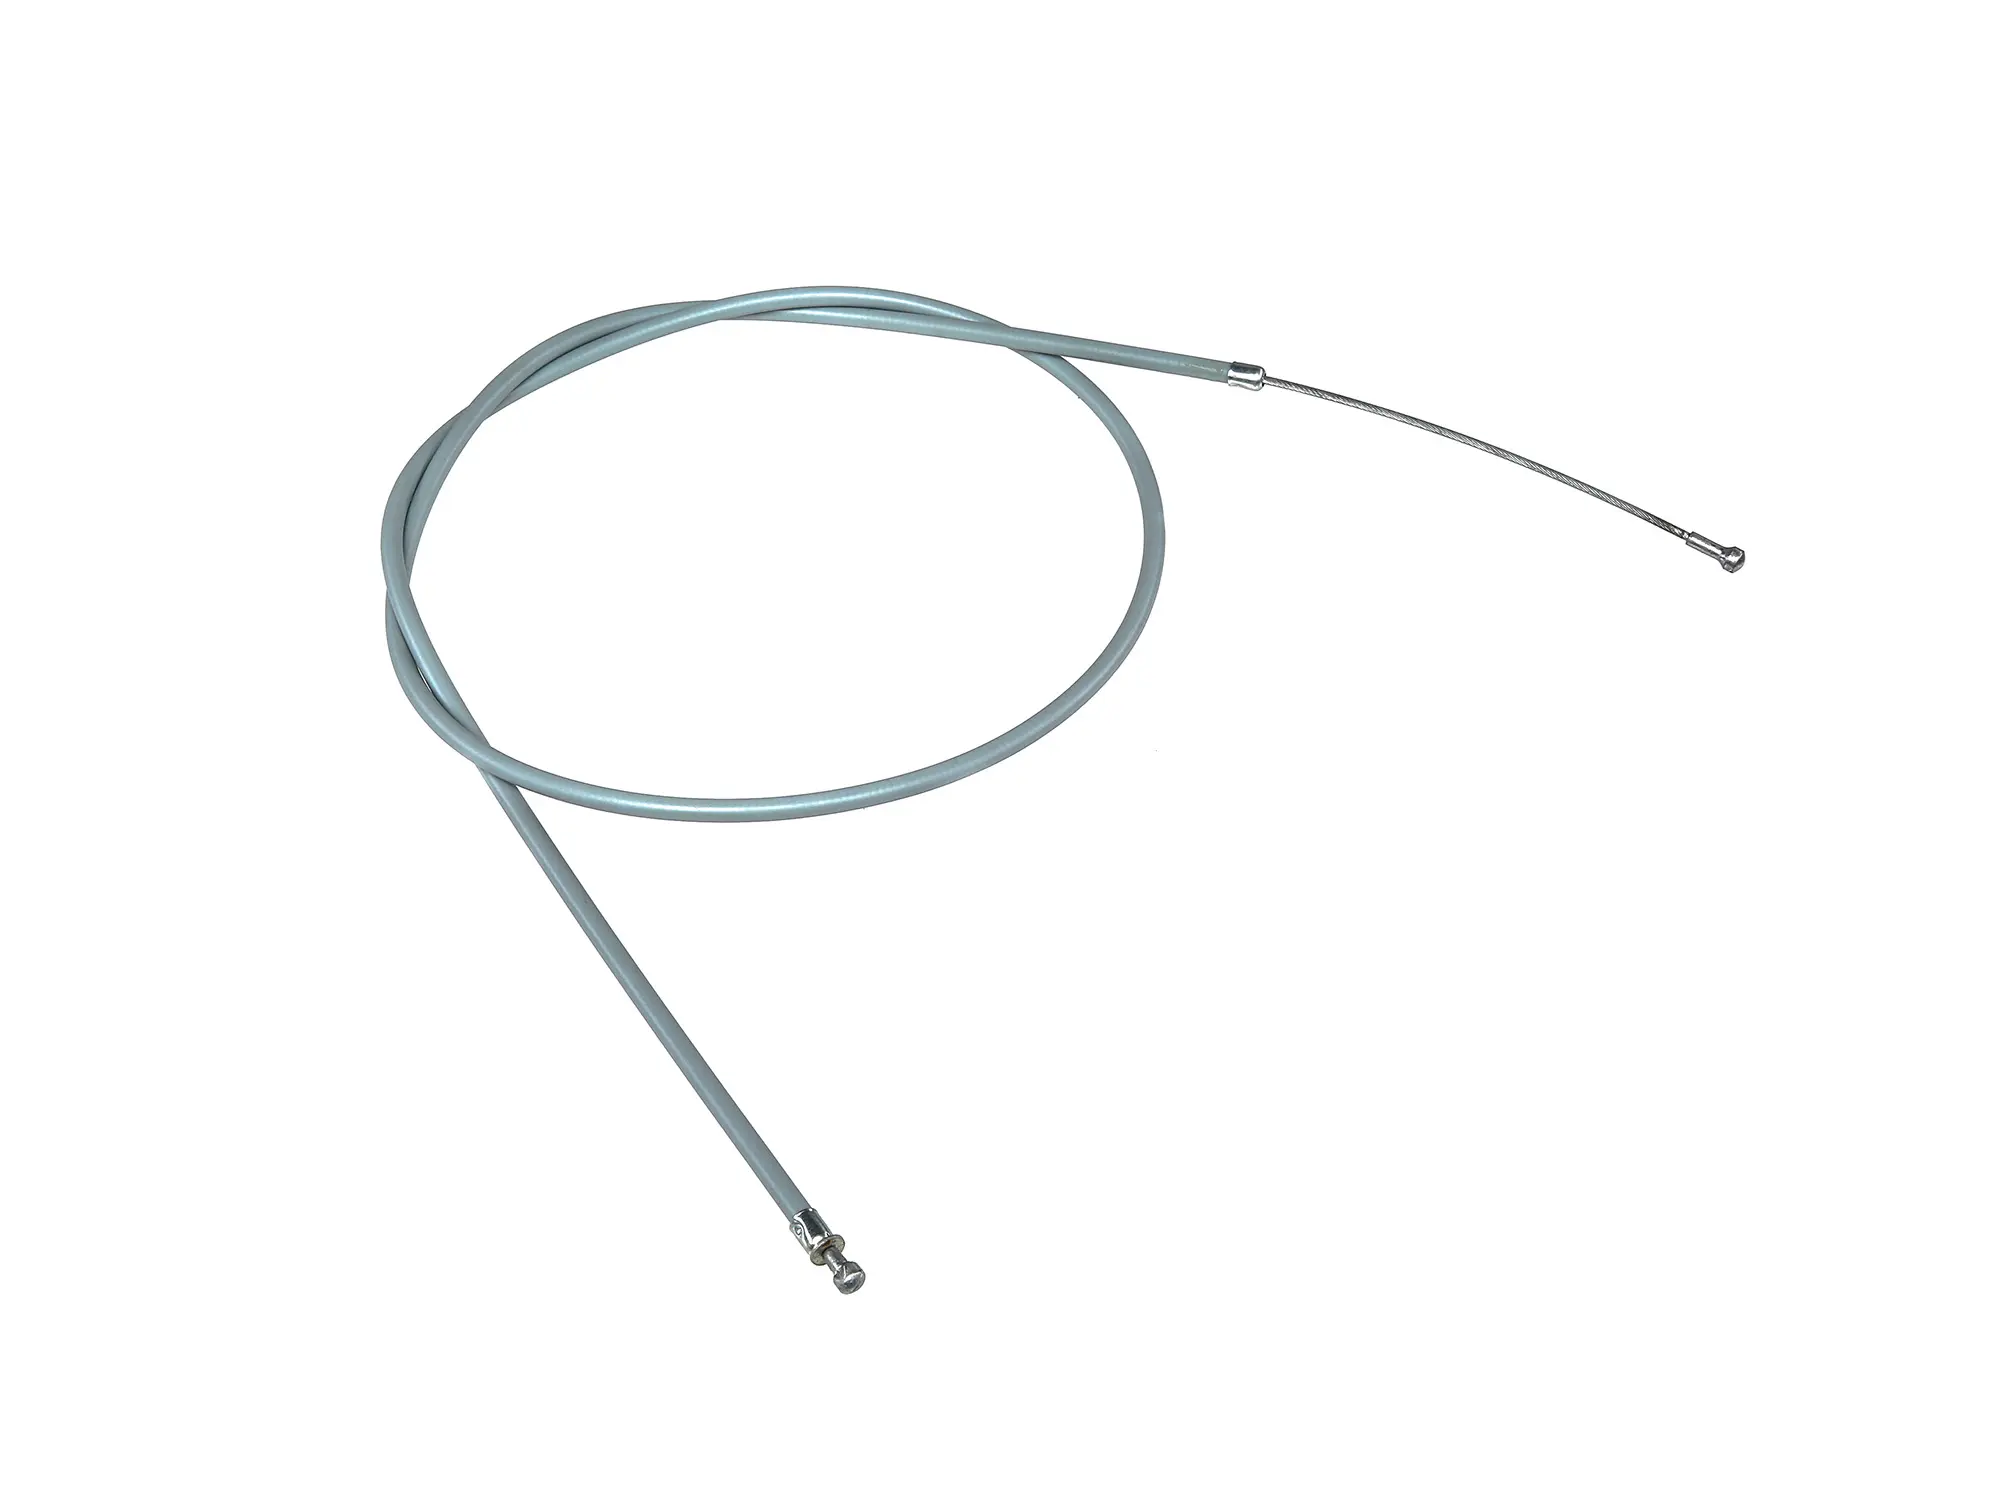 Brake cable front, grey - for Simson SR4-1 Spatz, Item no: 10021006 - Image 1